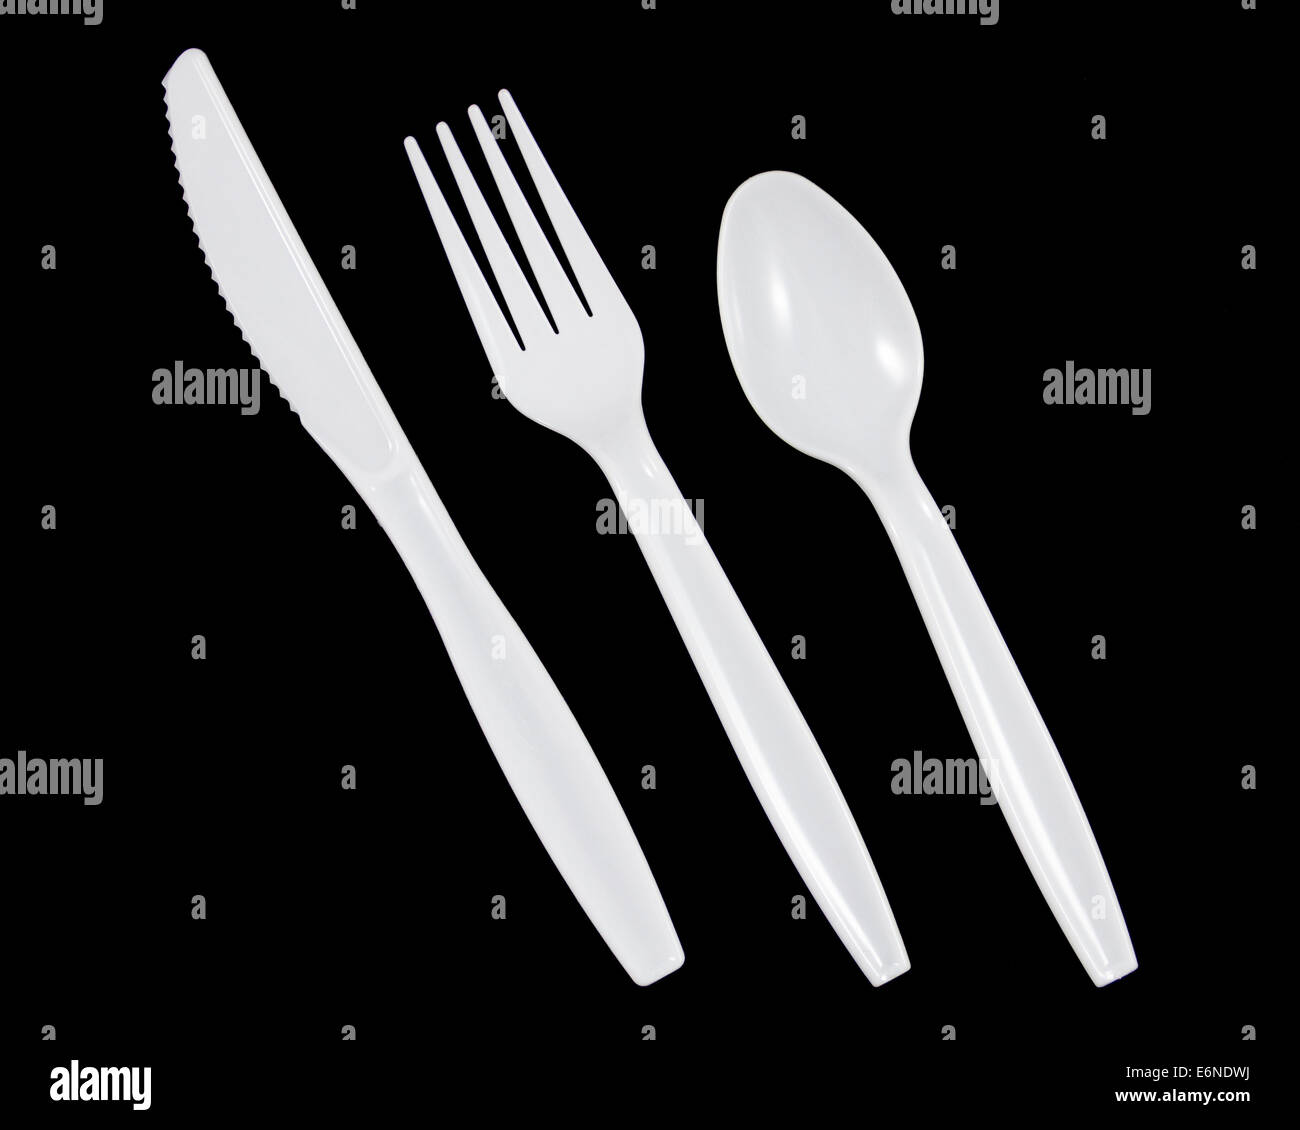 White plastic knife, fork and spoon on black background. Stock Photo